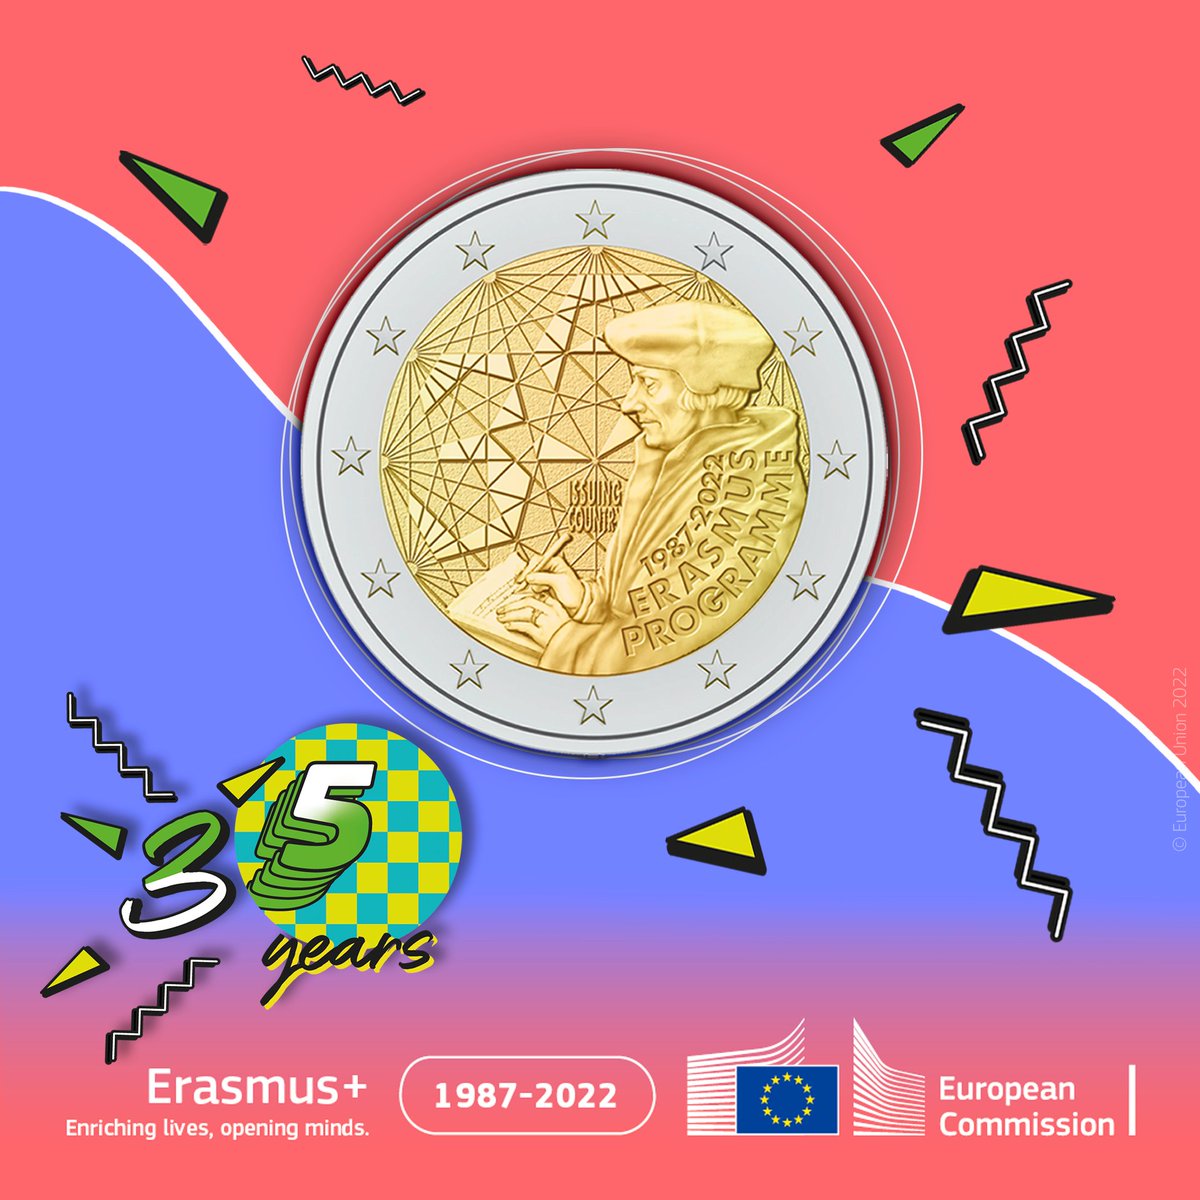 Happy Birthday @EUErasmusPlus! Our TU has been involved from the very first moment, first with student exchanges, then in bilateral cooperations, meanwhile also with internships and various projects up to the @ECIUniversities. To the next 35 years! #ErasmusPlus35Years https://t.co/qXYOM1rHaq